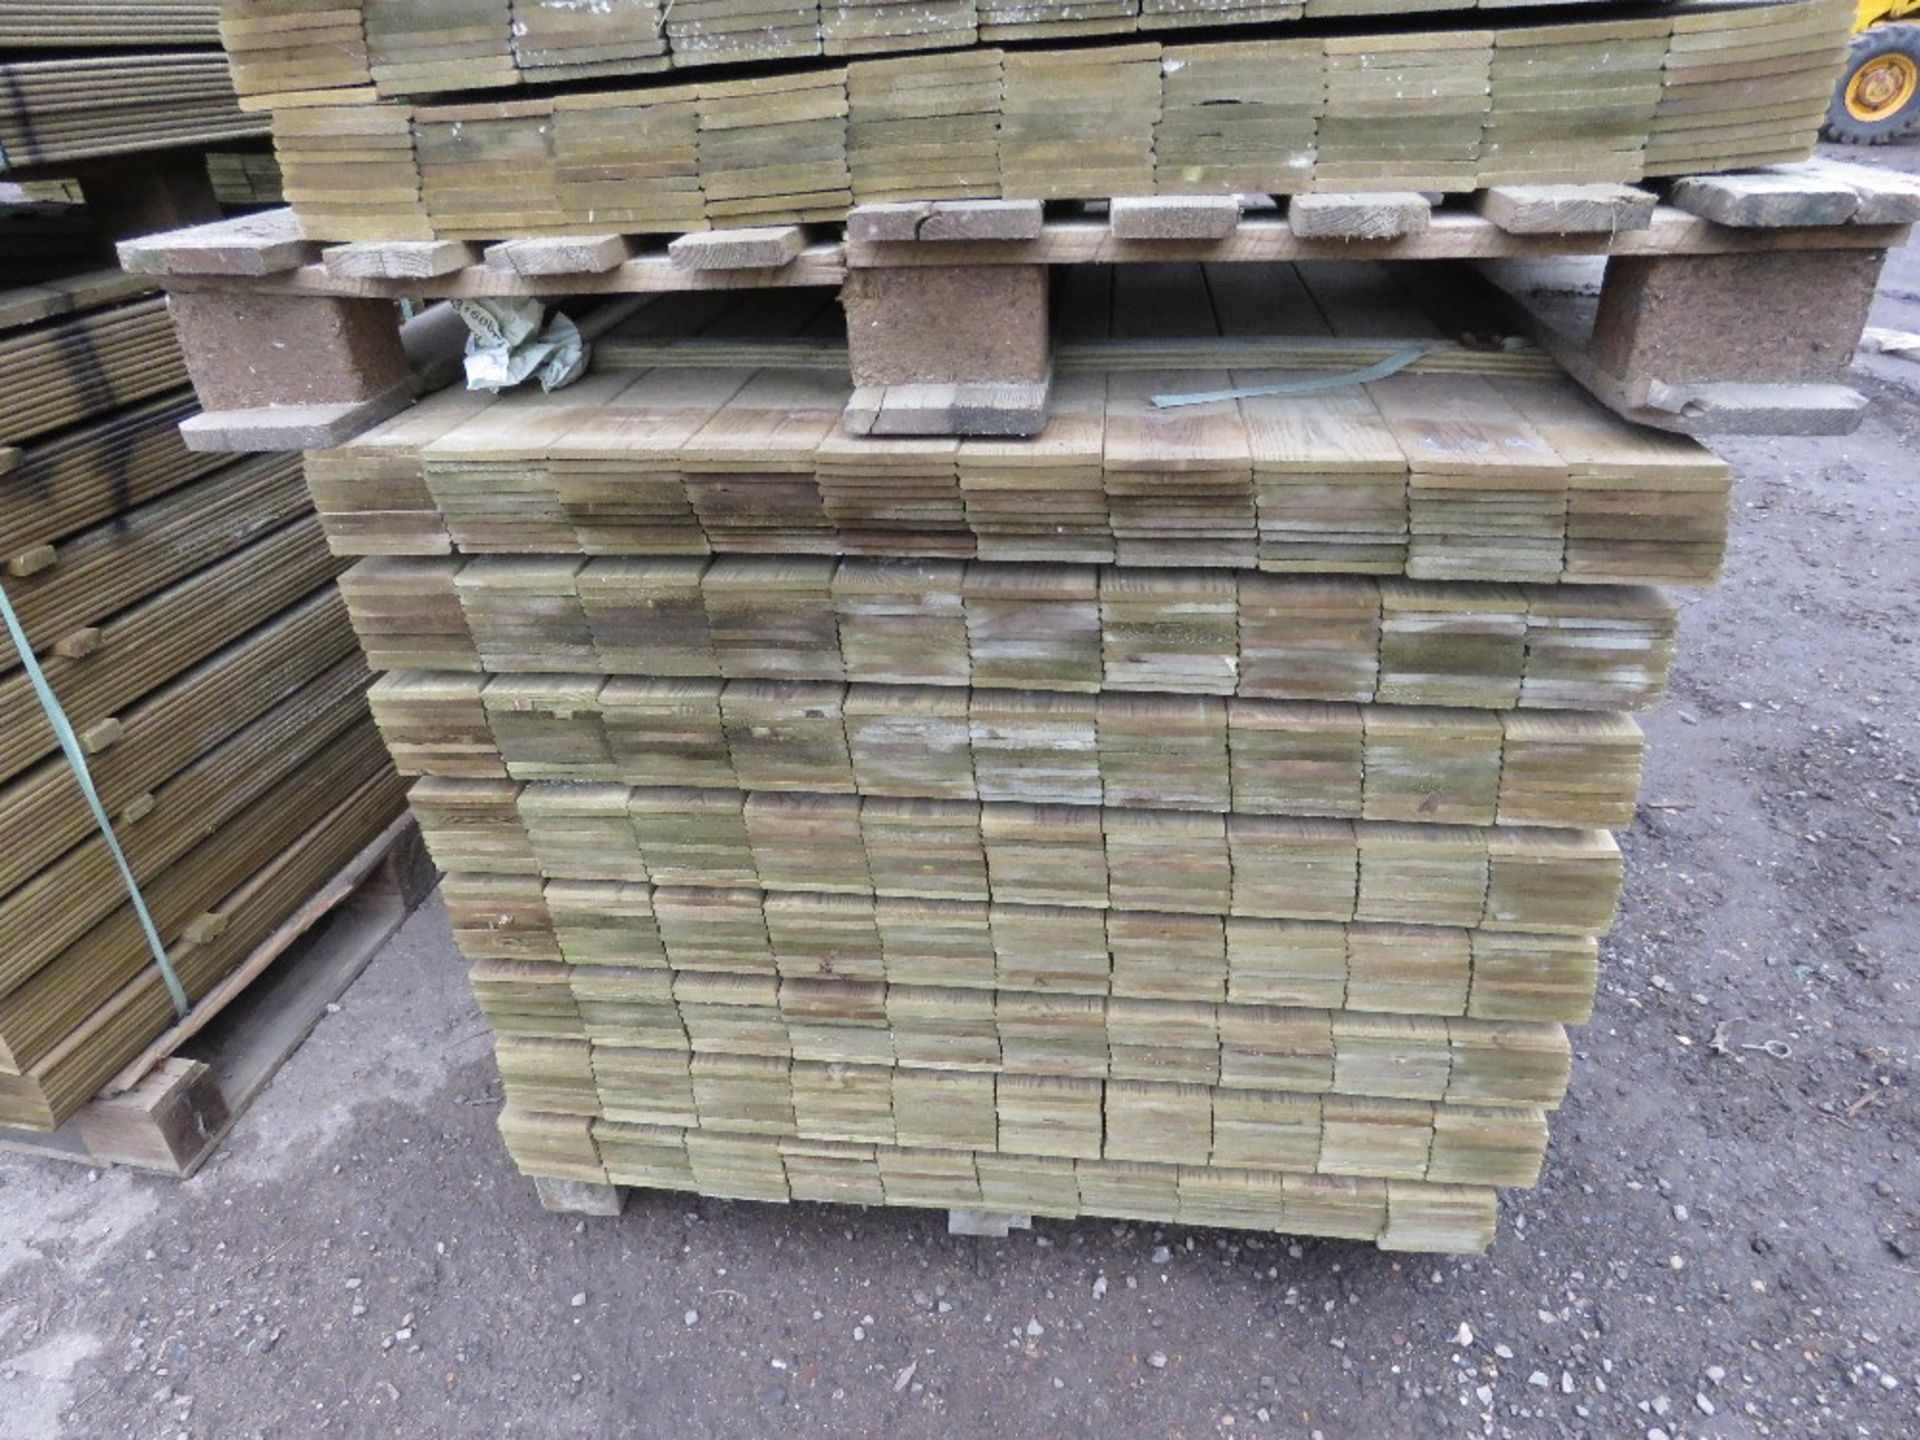 2 X PALLETS OF TREATED HIT AND MISS FENCE CLADDING BOARDS 1.04M LENGTH X 100MM WIDTH APPROX. - Image 5 of 6